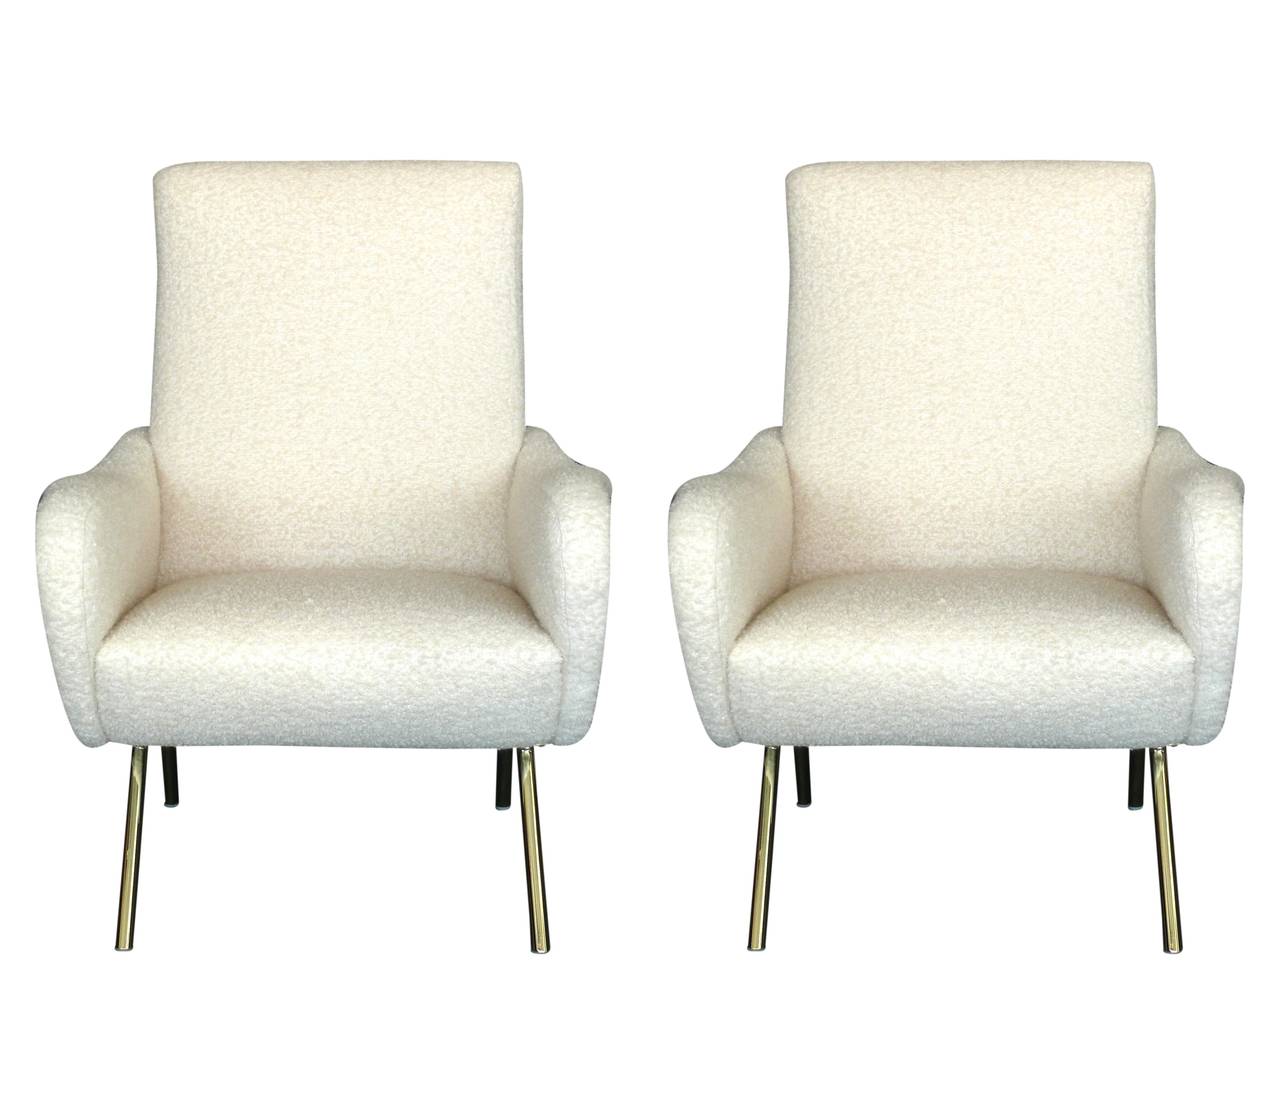 Gorgeous pair of Italian sculptural chairs. Newly upholstered in a creamy white wool bouclé fabric with a newly plated brass base. Sleek lines. Fantastic design.